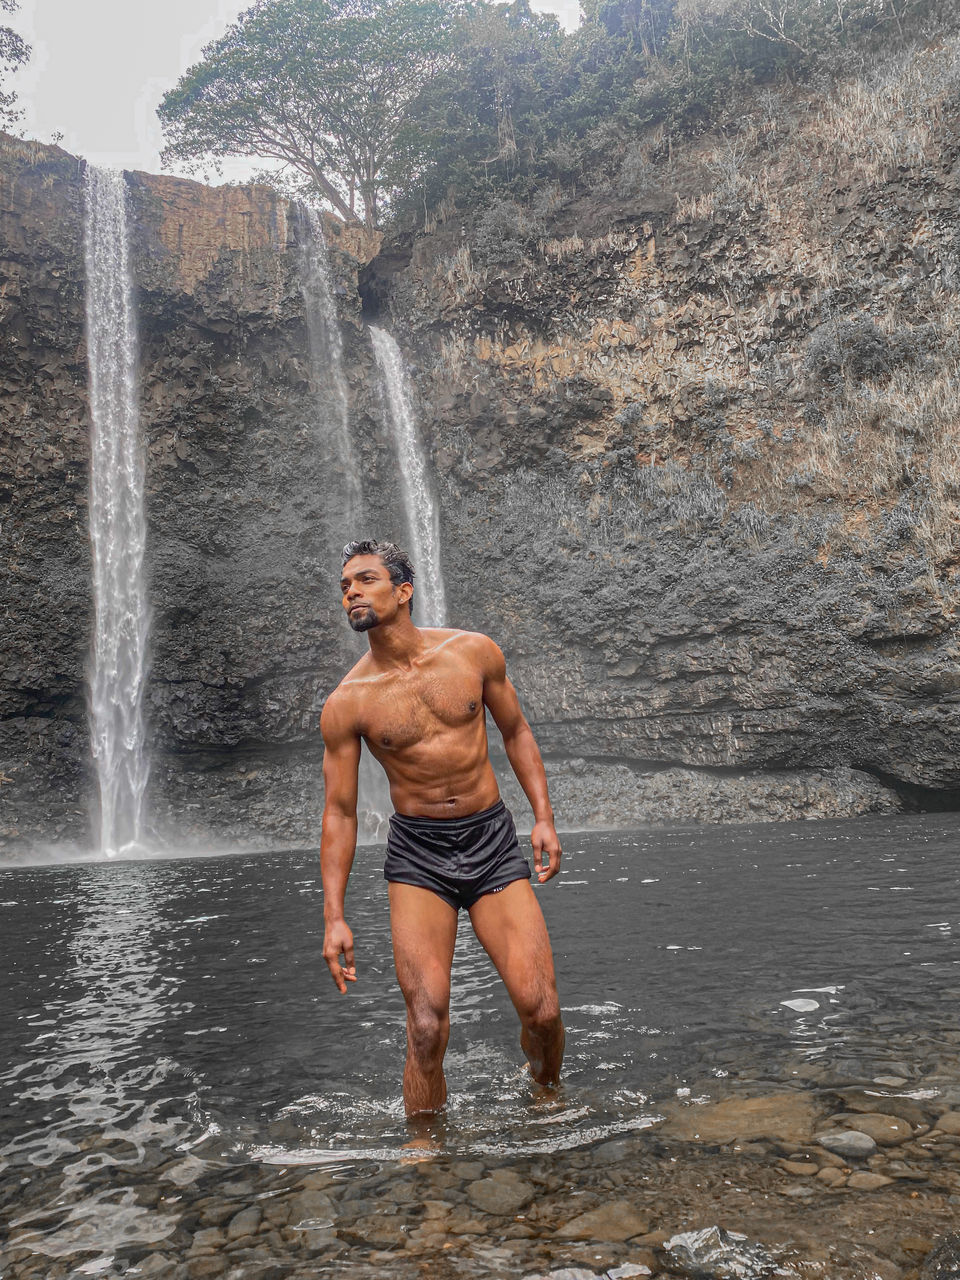 waterfall, water, one person, motion, men, nature, adult, rock, leisure activity, sports, lifestyles, scenics - nature, beauty in nature, splashing, day, holiday, vacation, land, trip, young adult, mountain, full length, outdoors, rock formation, strength, adventure, wet, muscular build, sea, travel, front view, standing, vitality, clothing, travel destinations, environment, shorts, enjoyment, activity